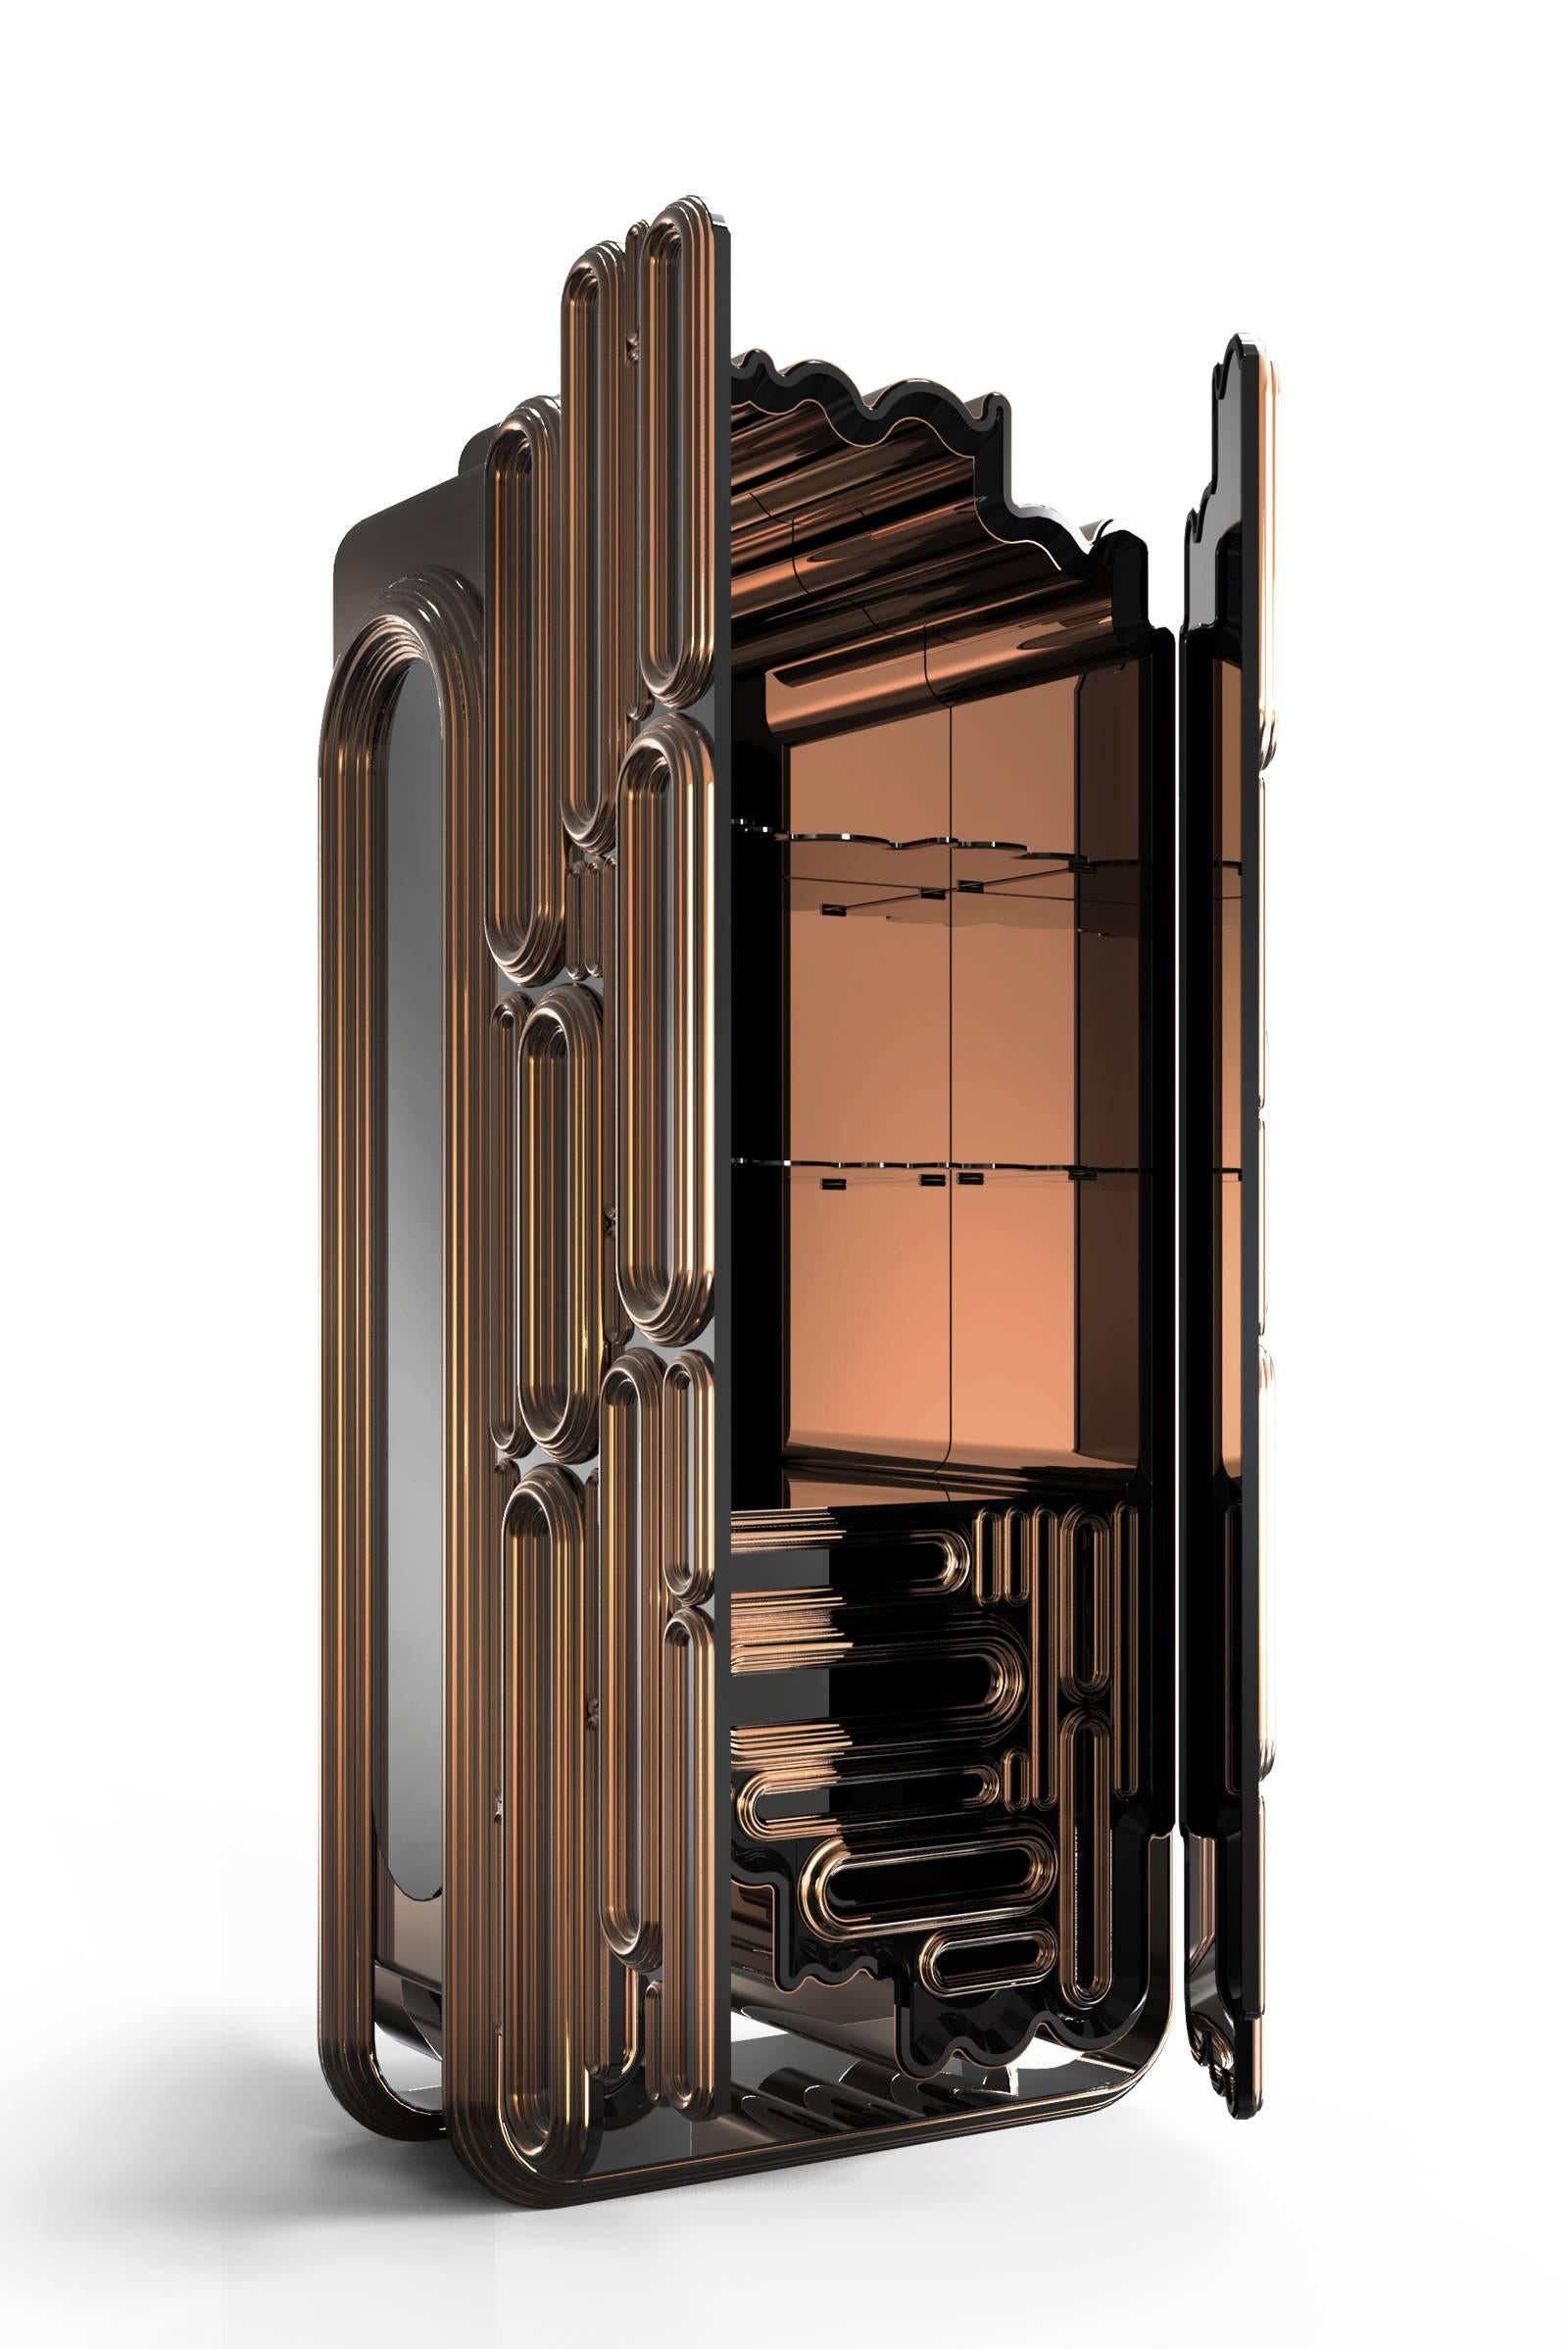 Cabinet Blocks Copper with wooden structure. Each part
covered by metallic elements in copper finish. Handcrafted in
black and copper high gloss varnish finish. Mirror inside.
Joinery, lacquering, varnishing techniques.
Exceptional piece.


 